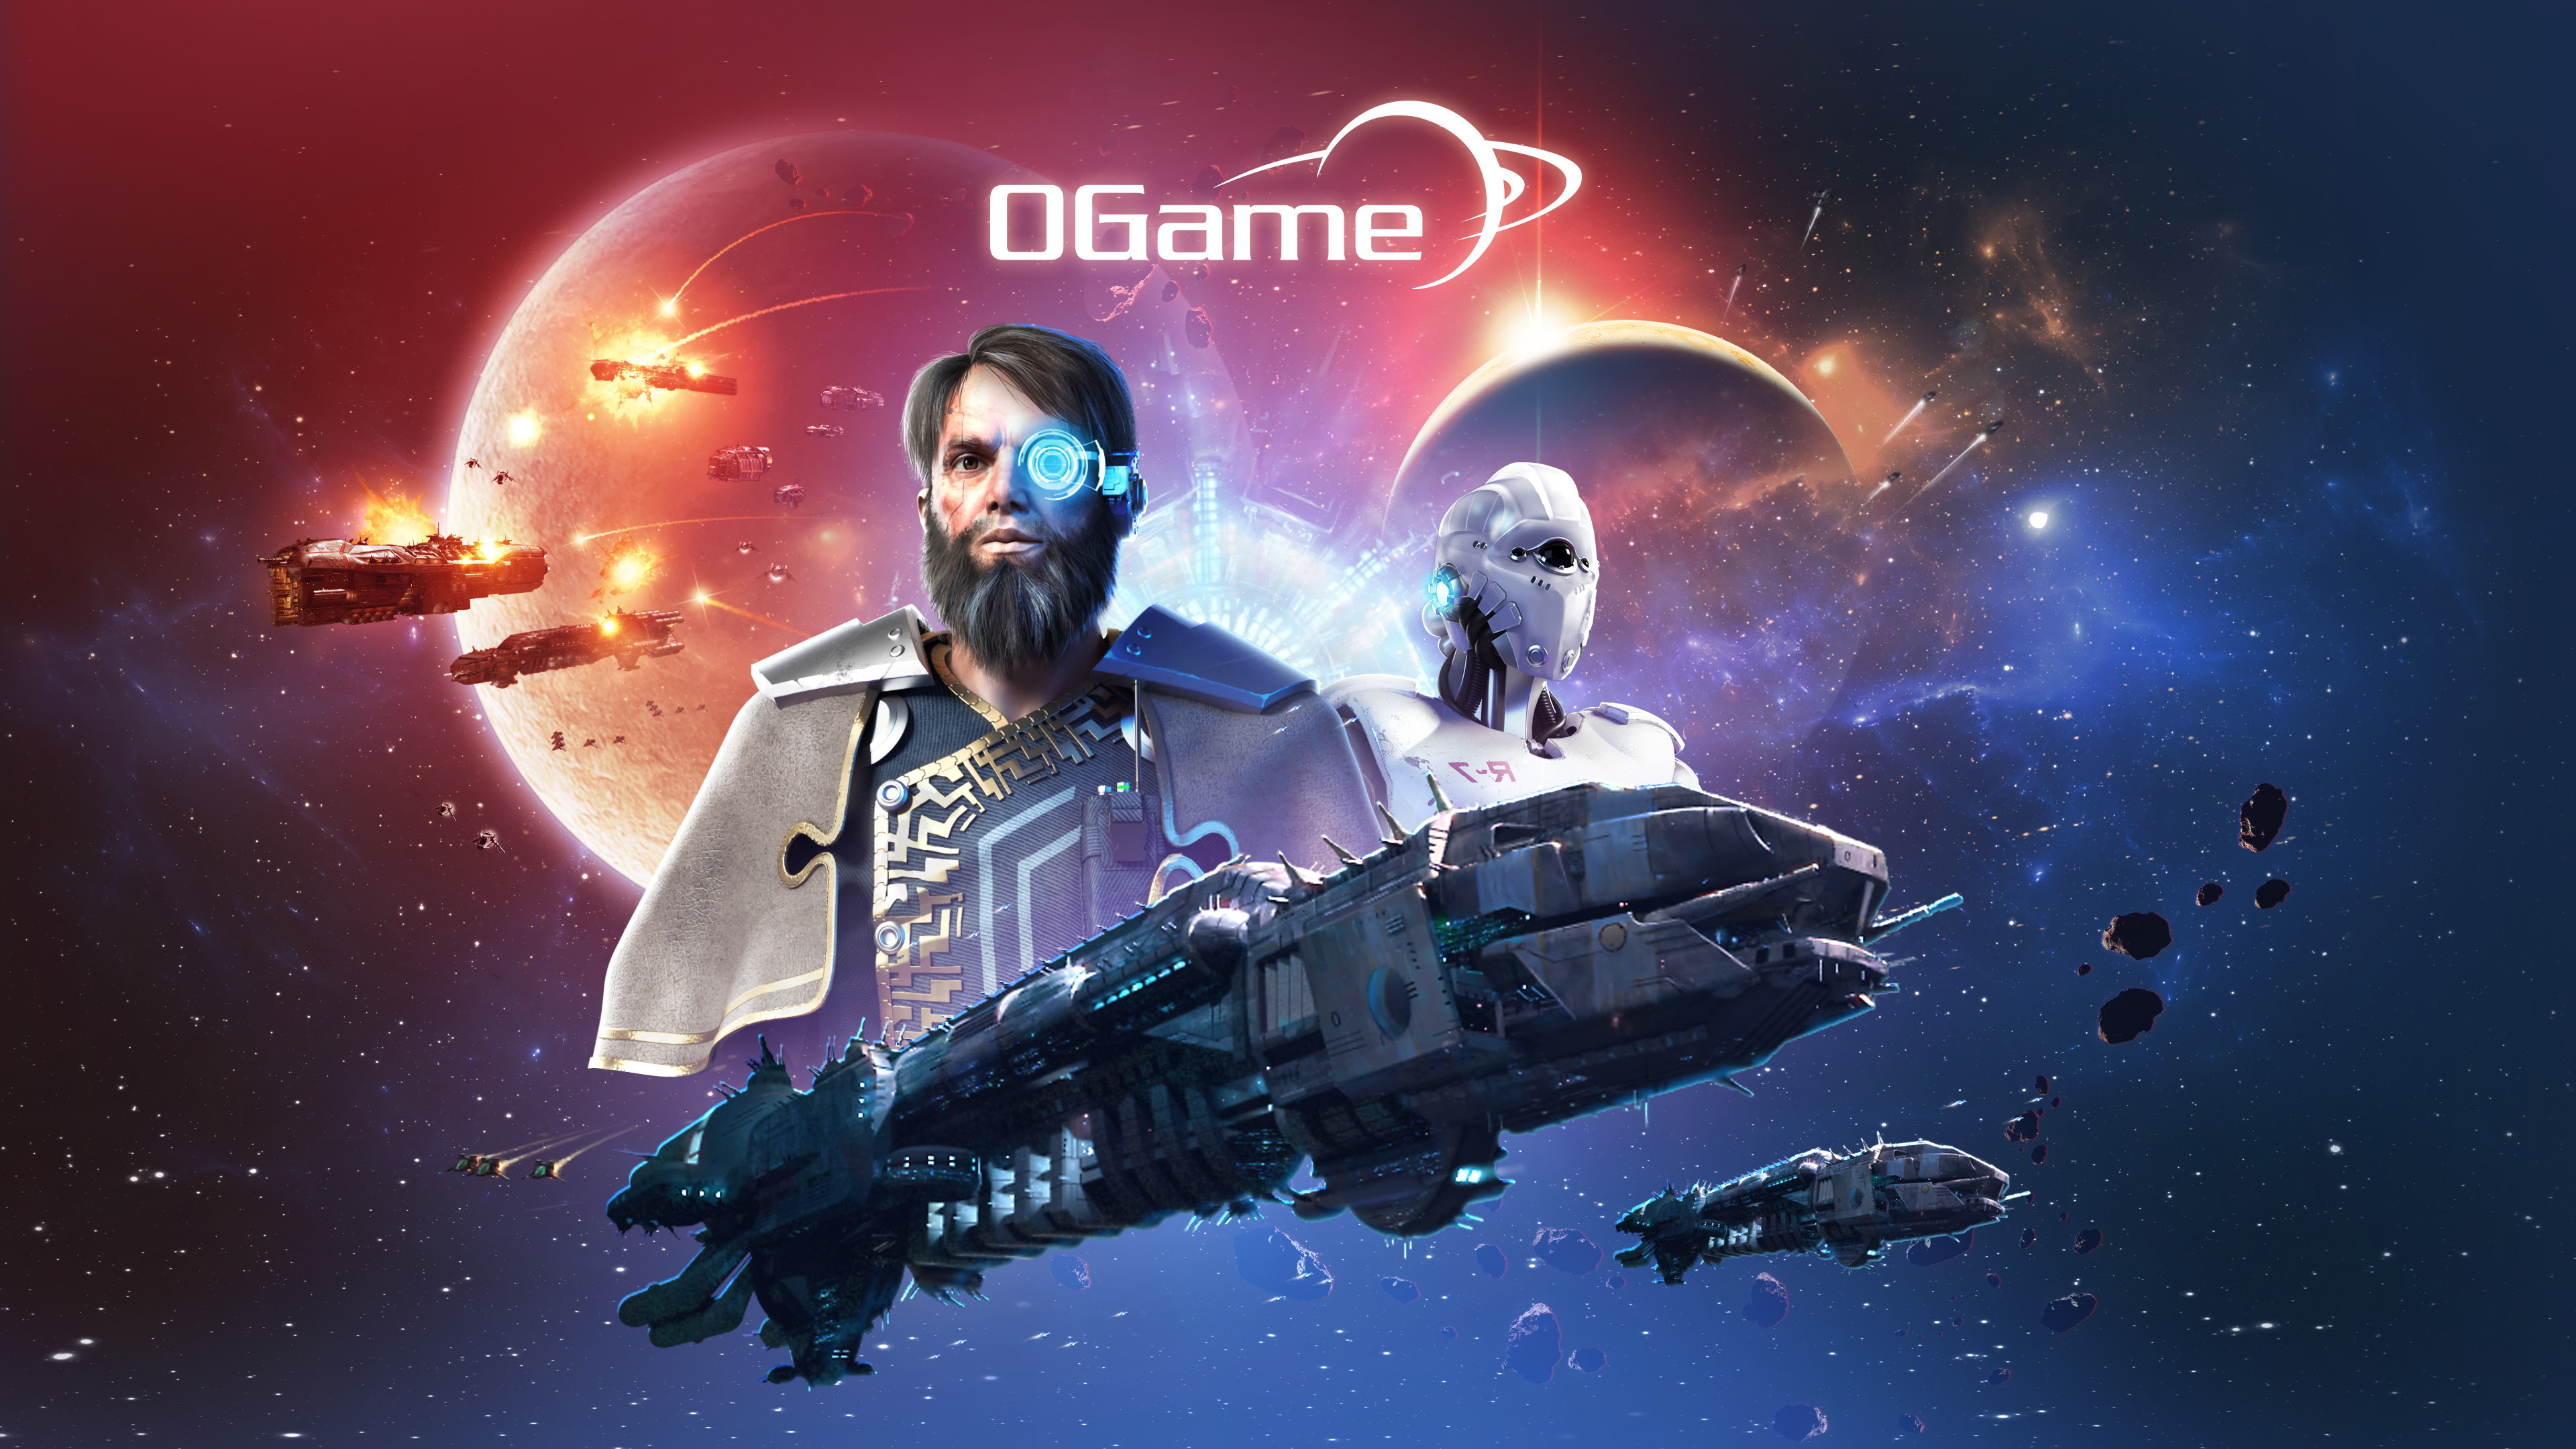 OGame Introduces The New Lifeforms Expansion Today